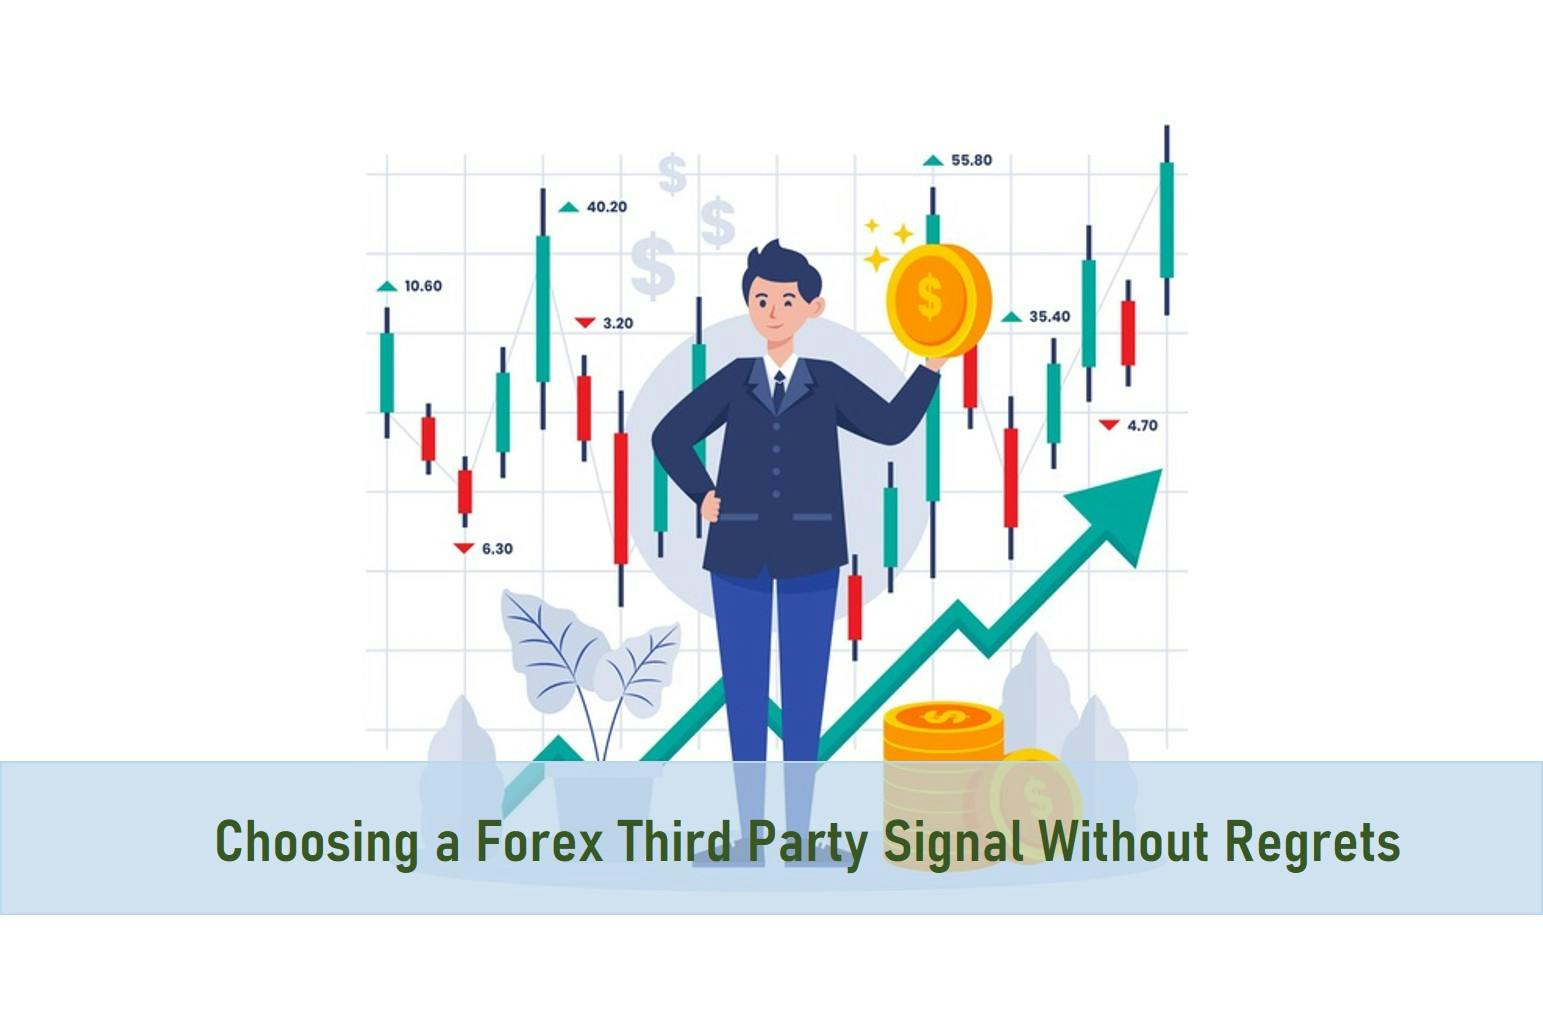 Choosing a Forex Third Party Signal Without Regrets